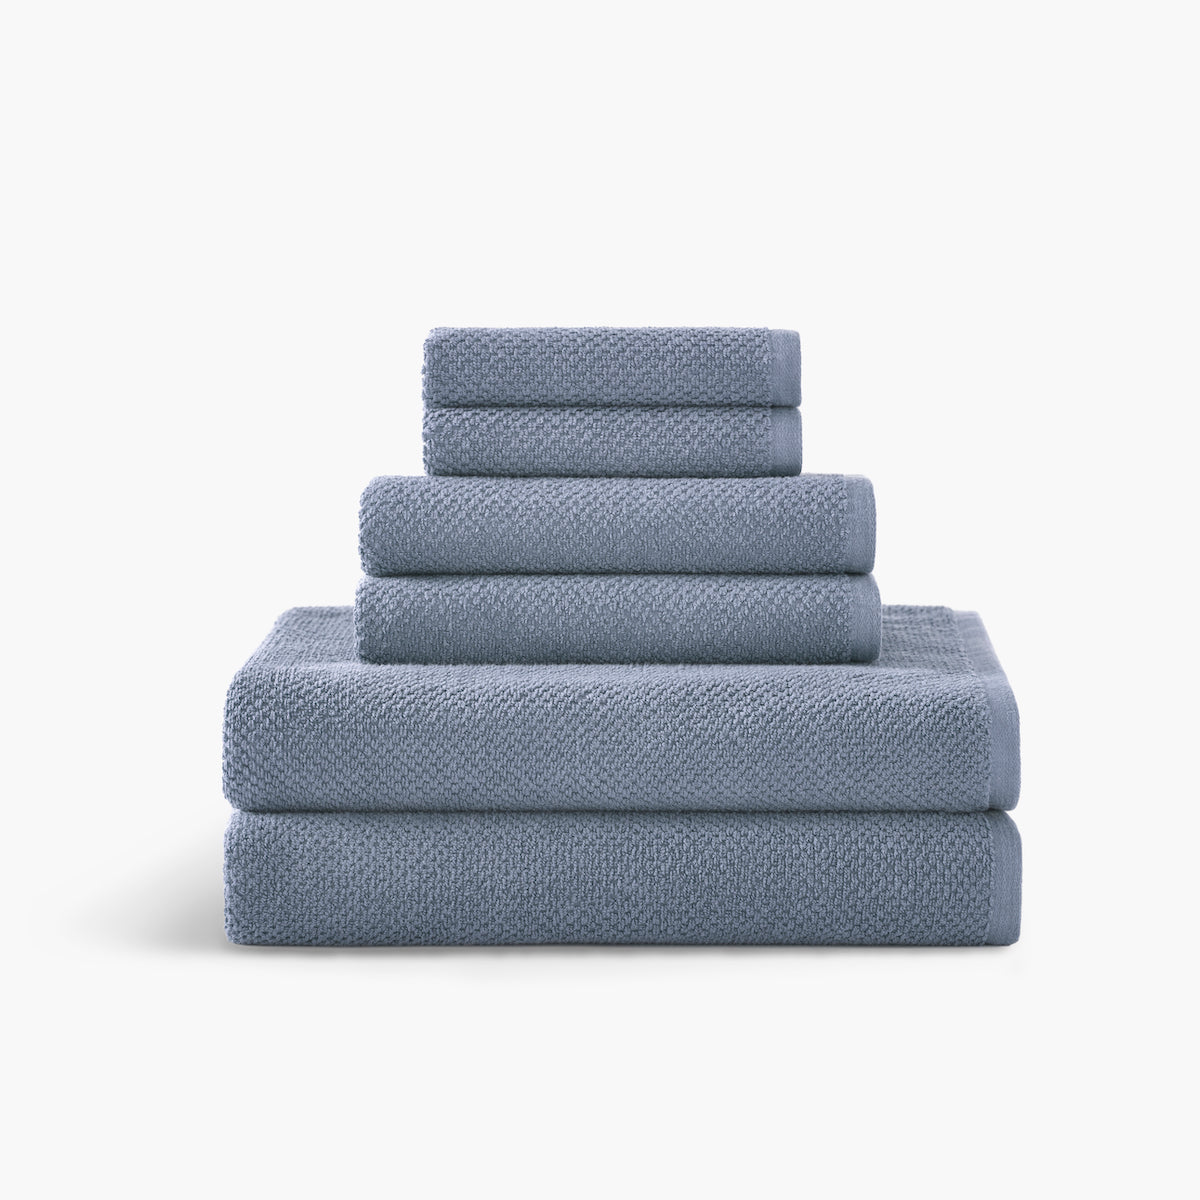 Under The Canopy Luxe Organic Cotton Towel - Blue Fog, Blue Fog / Wash Cloth Wash Cloth Blue Fog